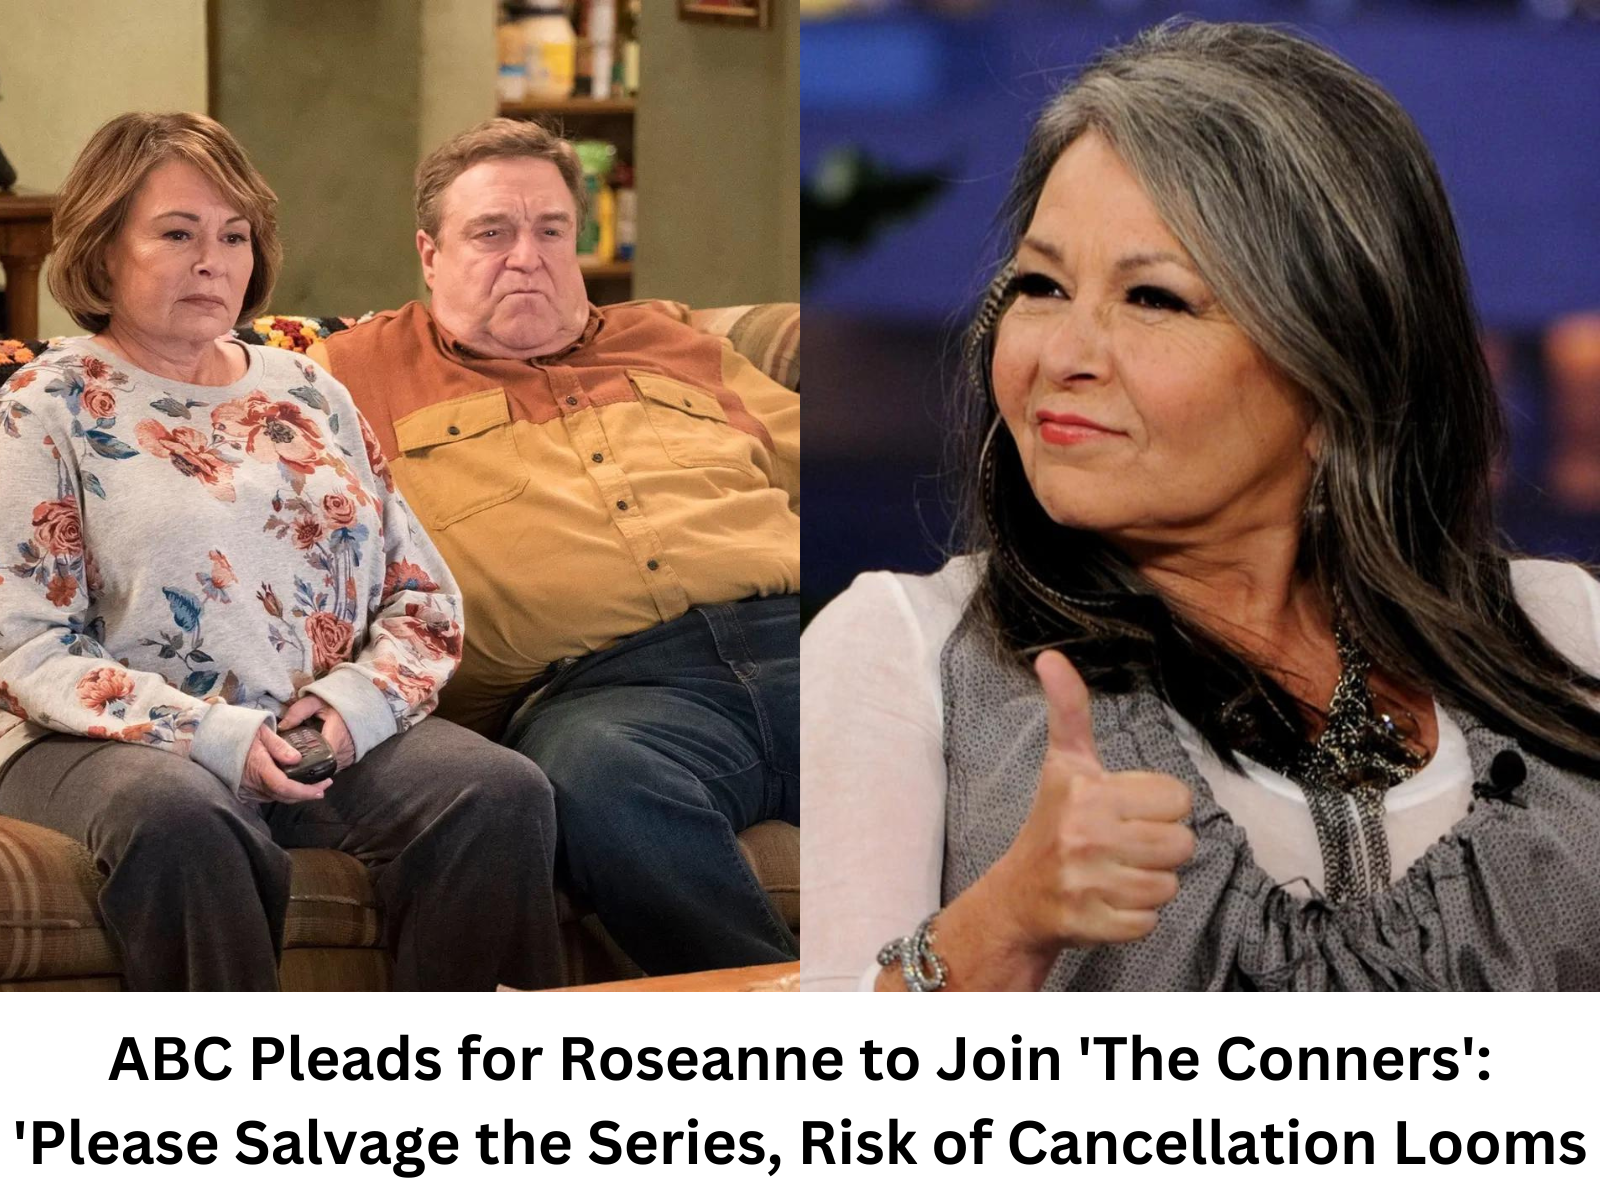 ABC’s Desperate Plea: Roseanne, Save ‘The Conners’ from the Chopping Block!